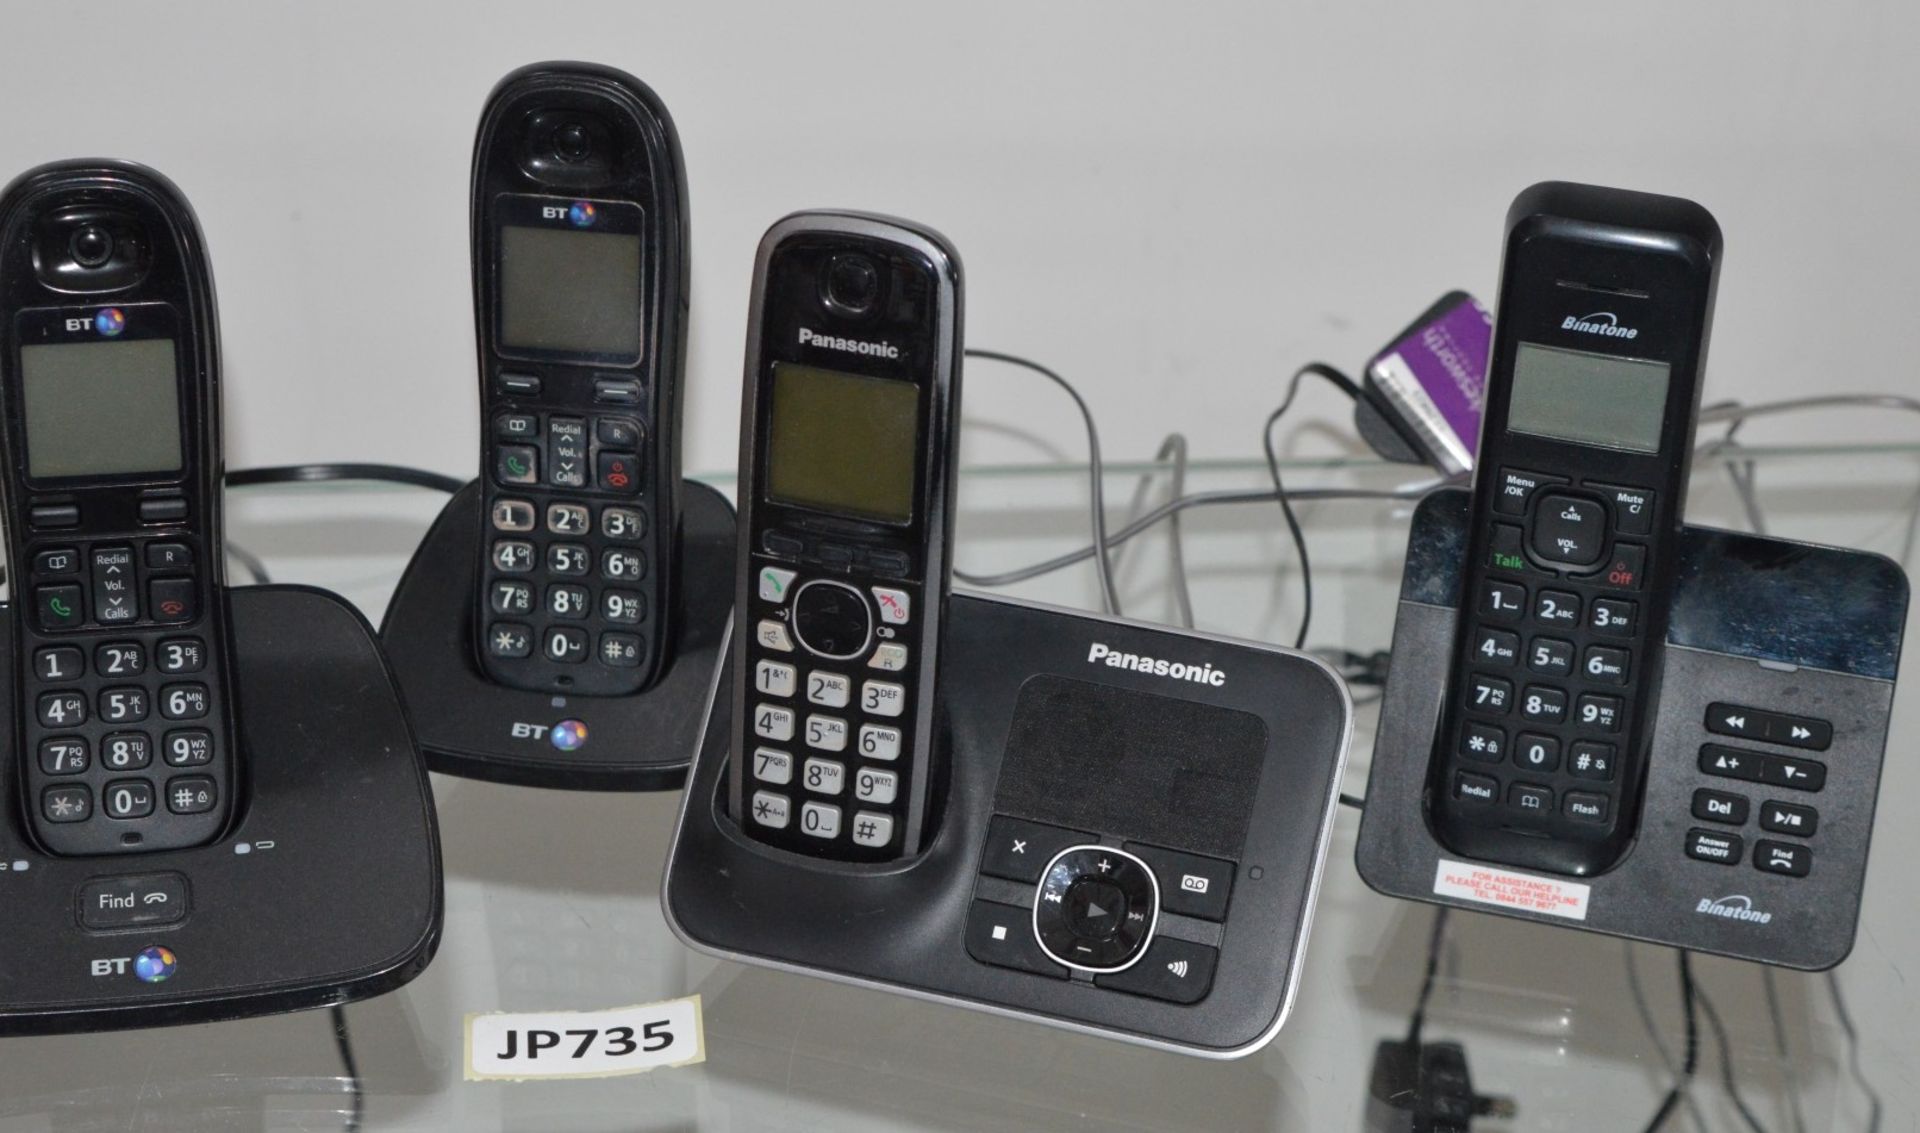 6 x Cordless Phone Handsets - Includes BT, Binatone and Panasonic Models - CL285 - Ref JP735 - - Image 3 of 4